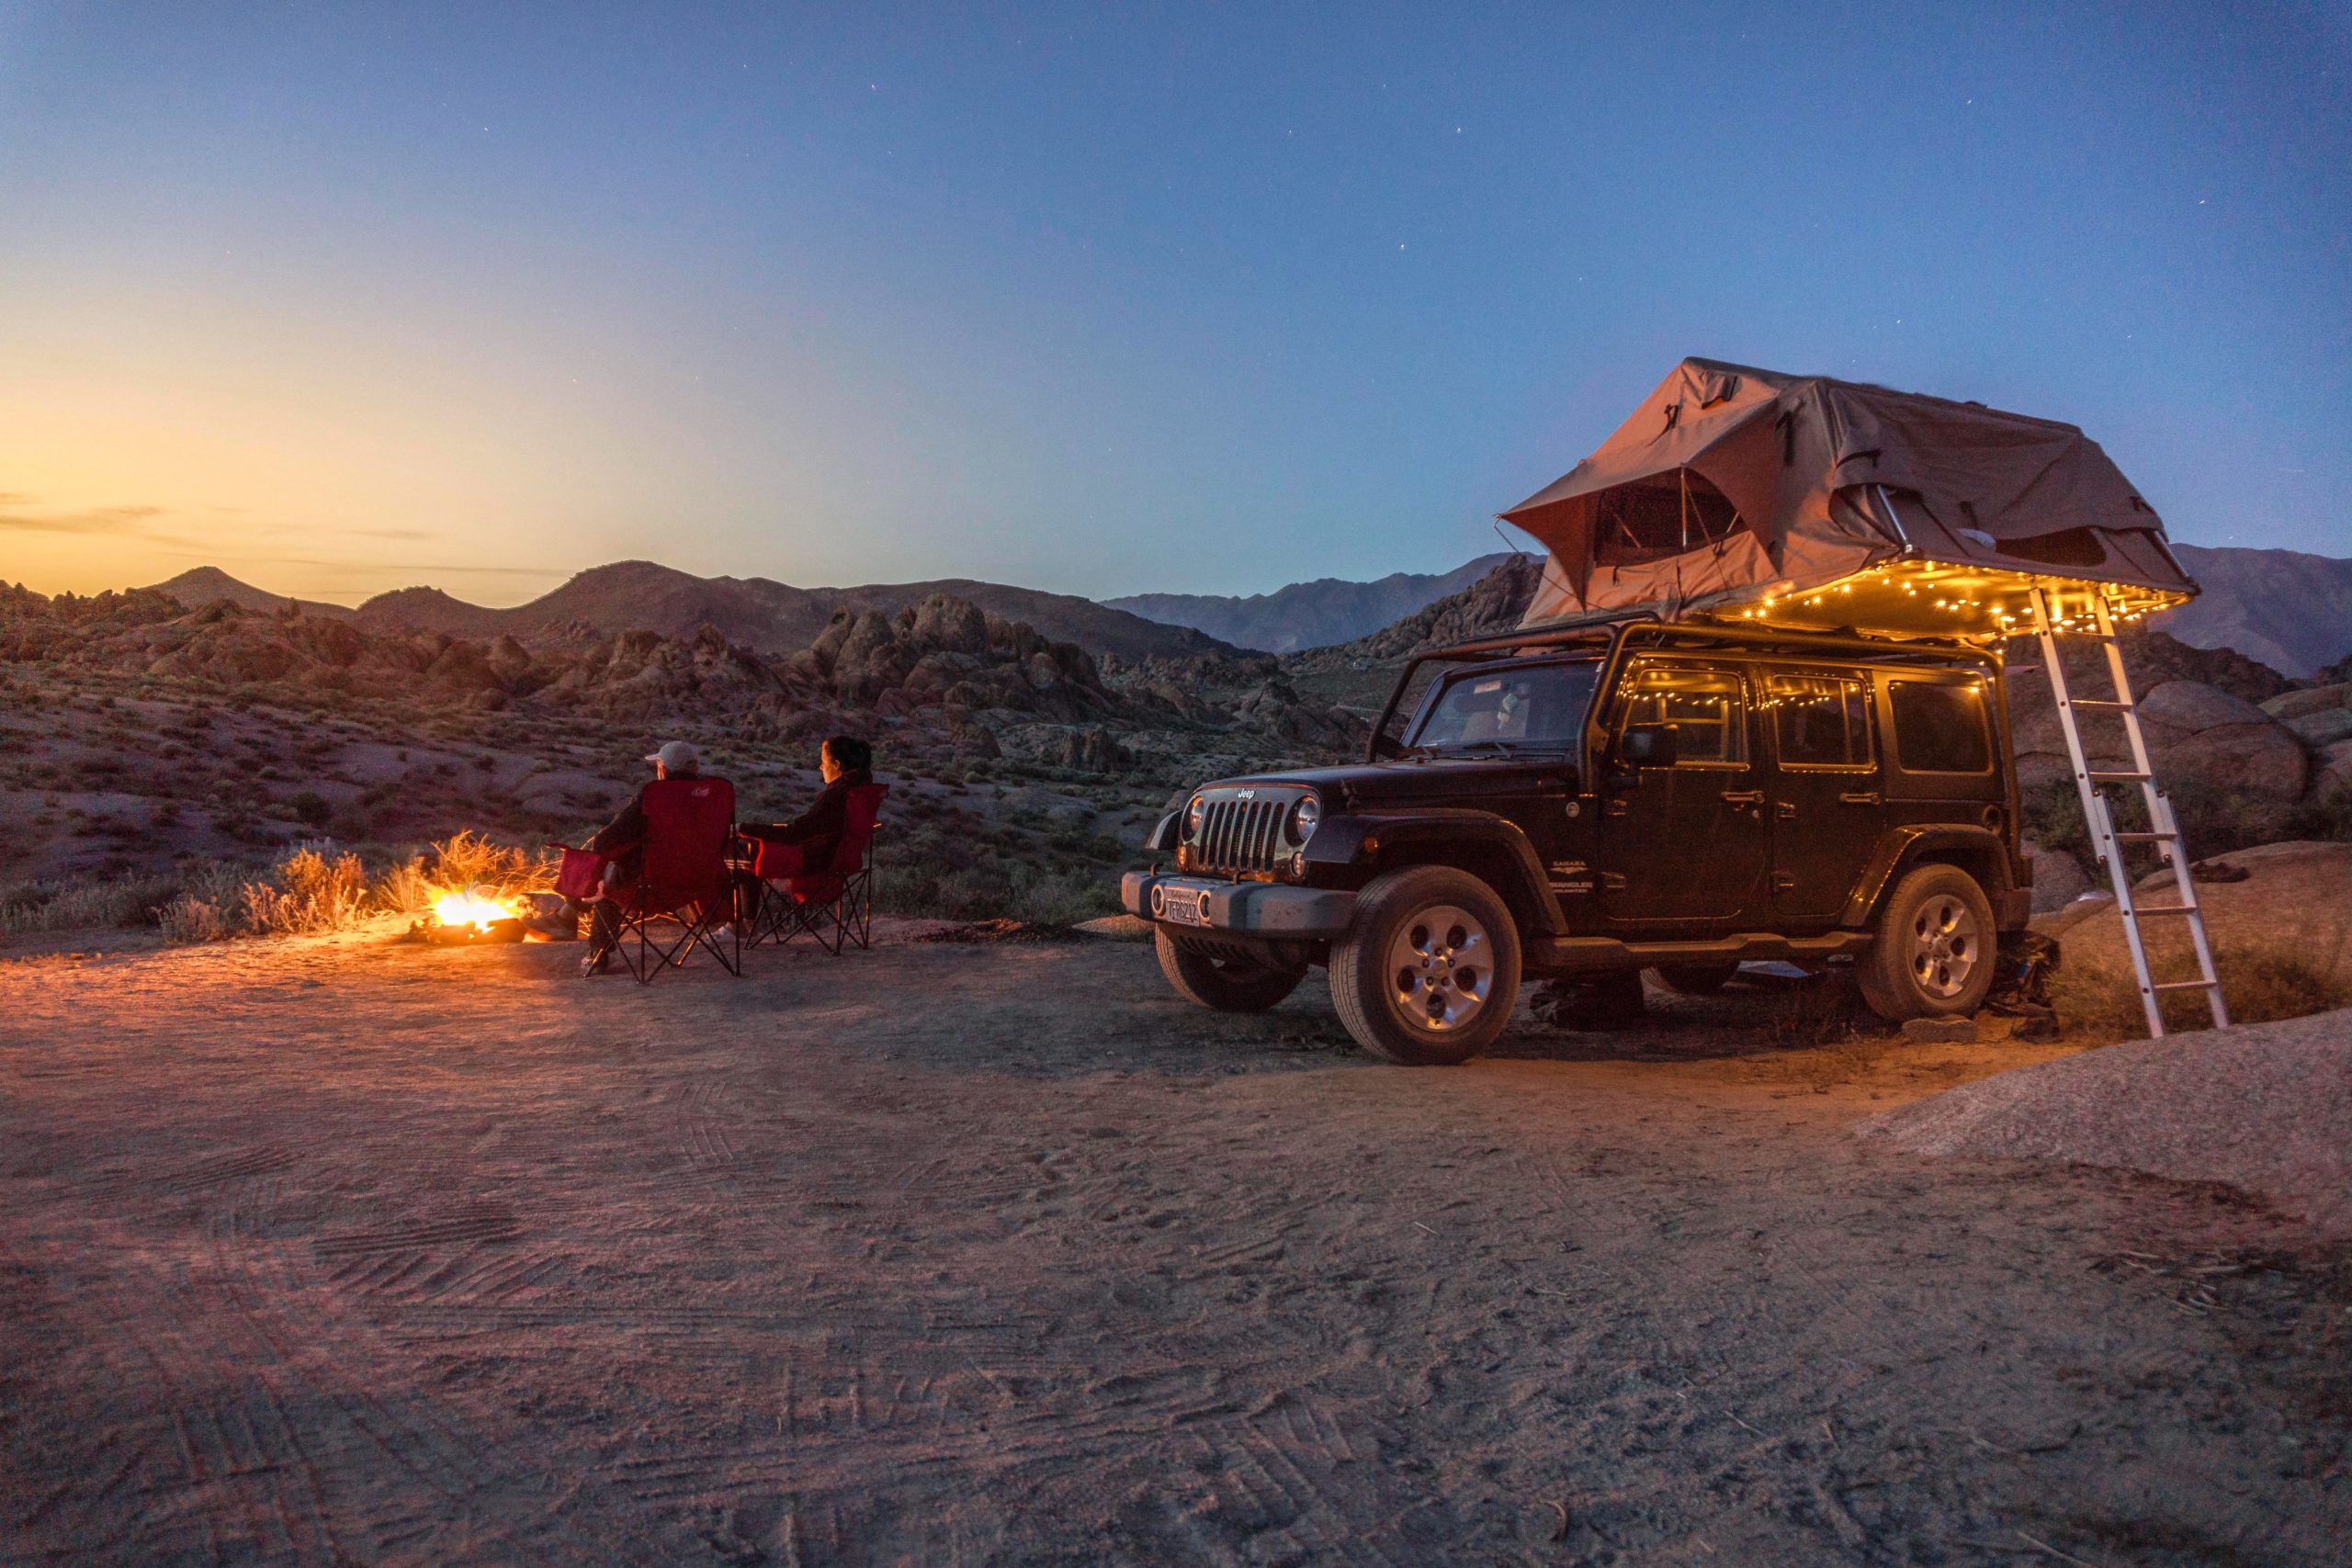 A jeep with a roof tent is parked in the desert. Off to the side, two people sit in camp chairs around a fire, gazing at the sun setting behind the mountains in the distance. 